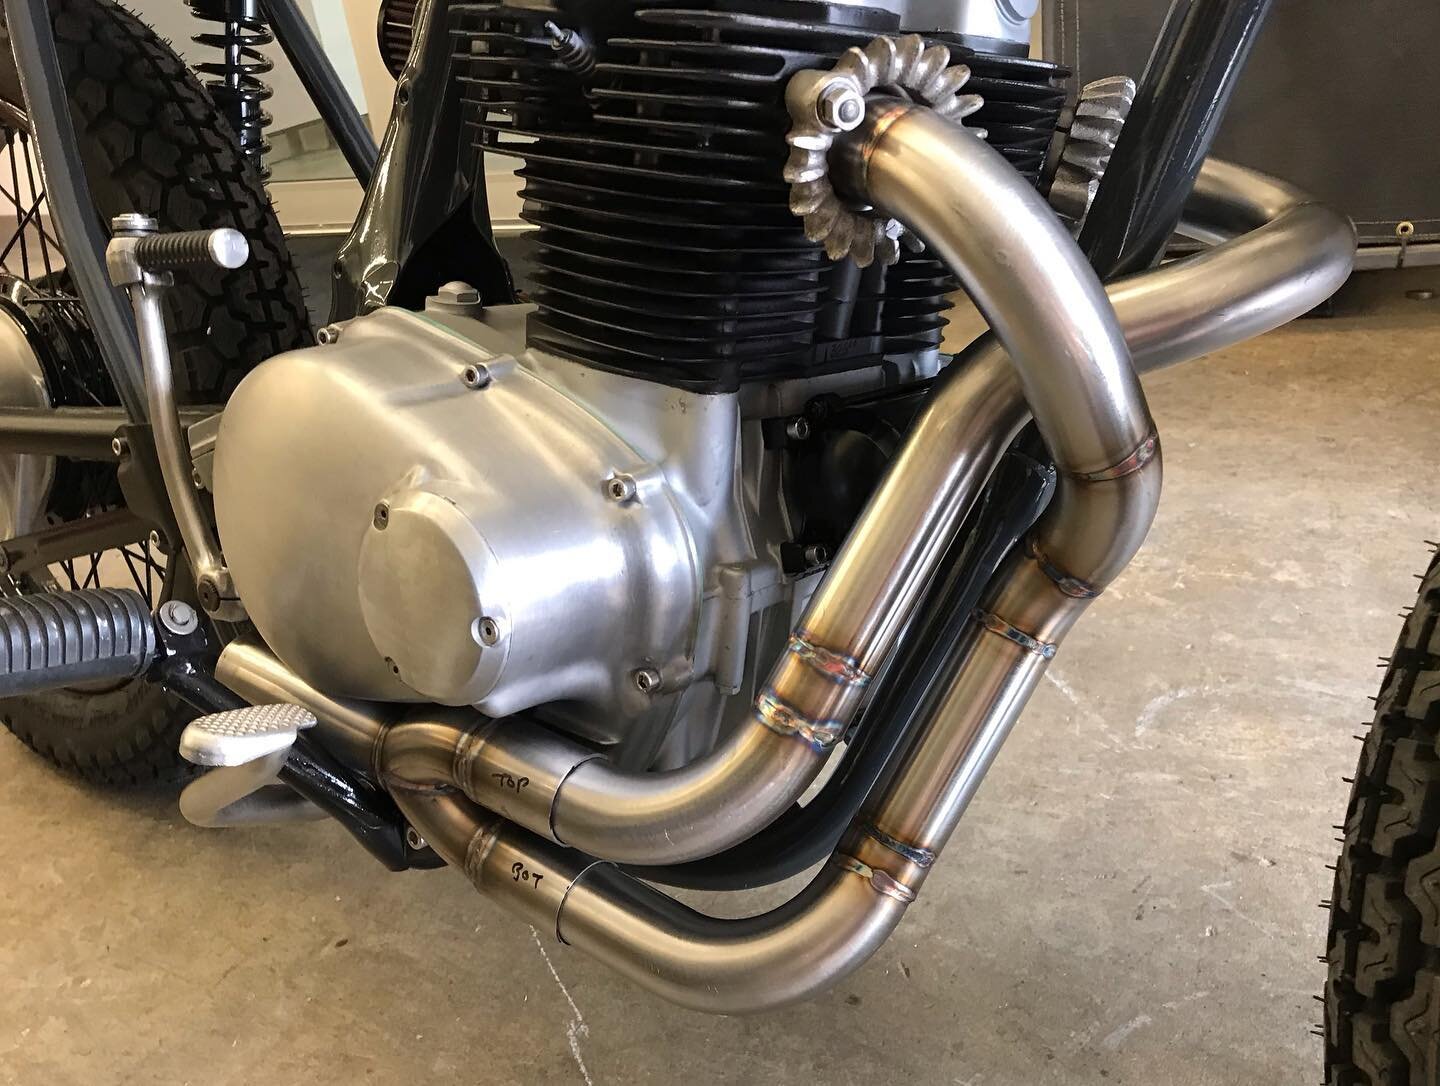 Making some serious progress on the CL350. Exhaust is almost there. Less than a month to the @thecongregationshow where it makes it&rsquo;s official debut. #maffeymoto #design #make #ride #honda #cl350 #customexhaust #stainless #tigwelding #caferacer